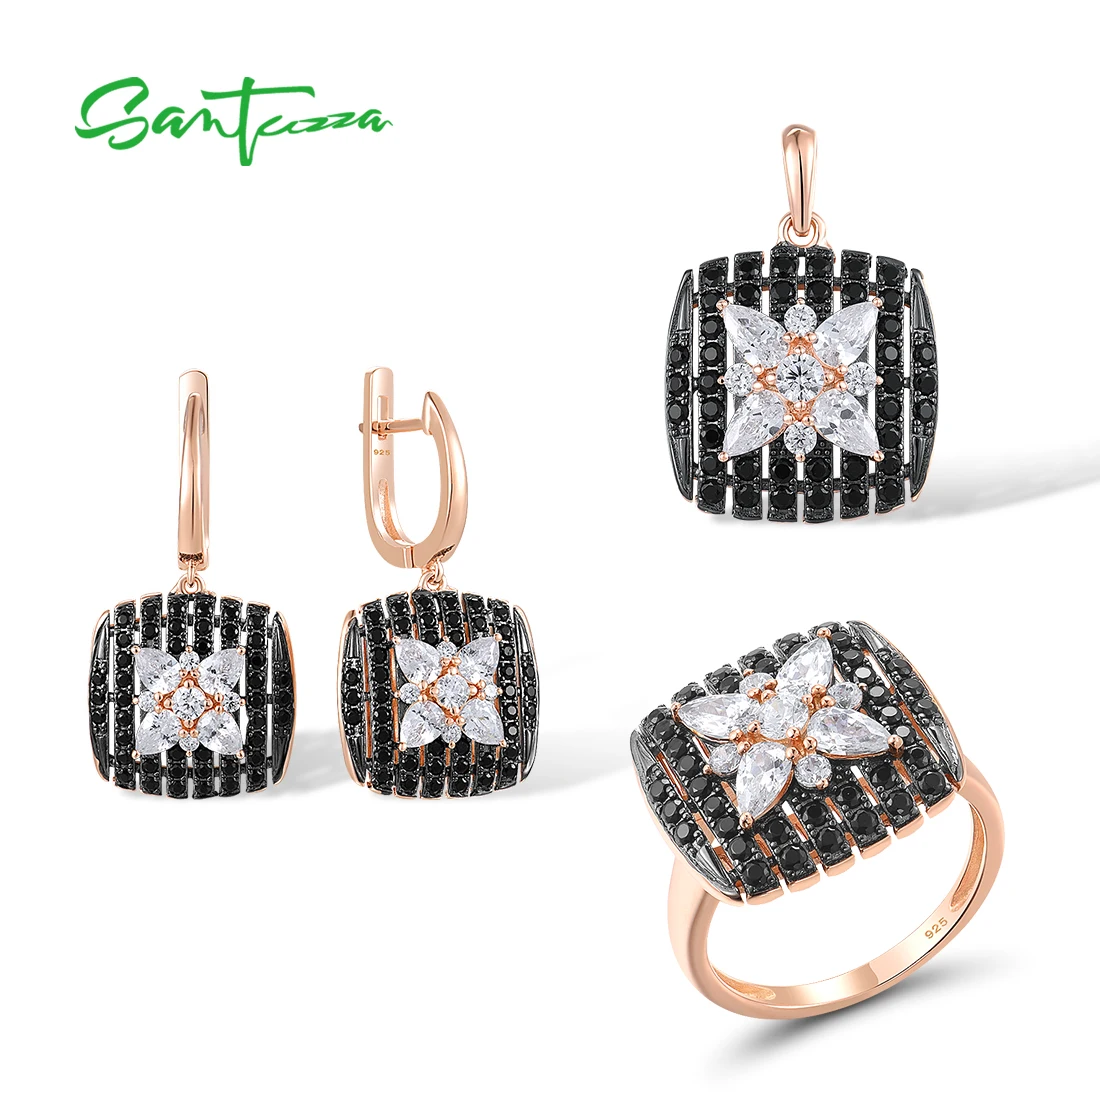 SANTUZZA 925 Sterling Silver Jewelry Set For Women Sparkling Black Spinel White CZ Pendant Earrings Ring Party Fine Chic Jewelry